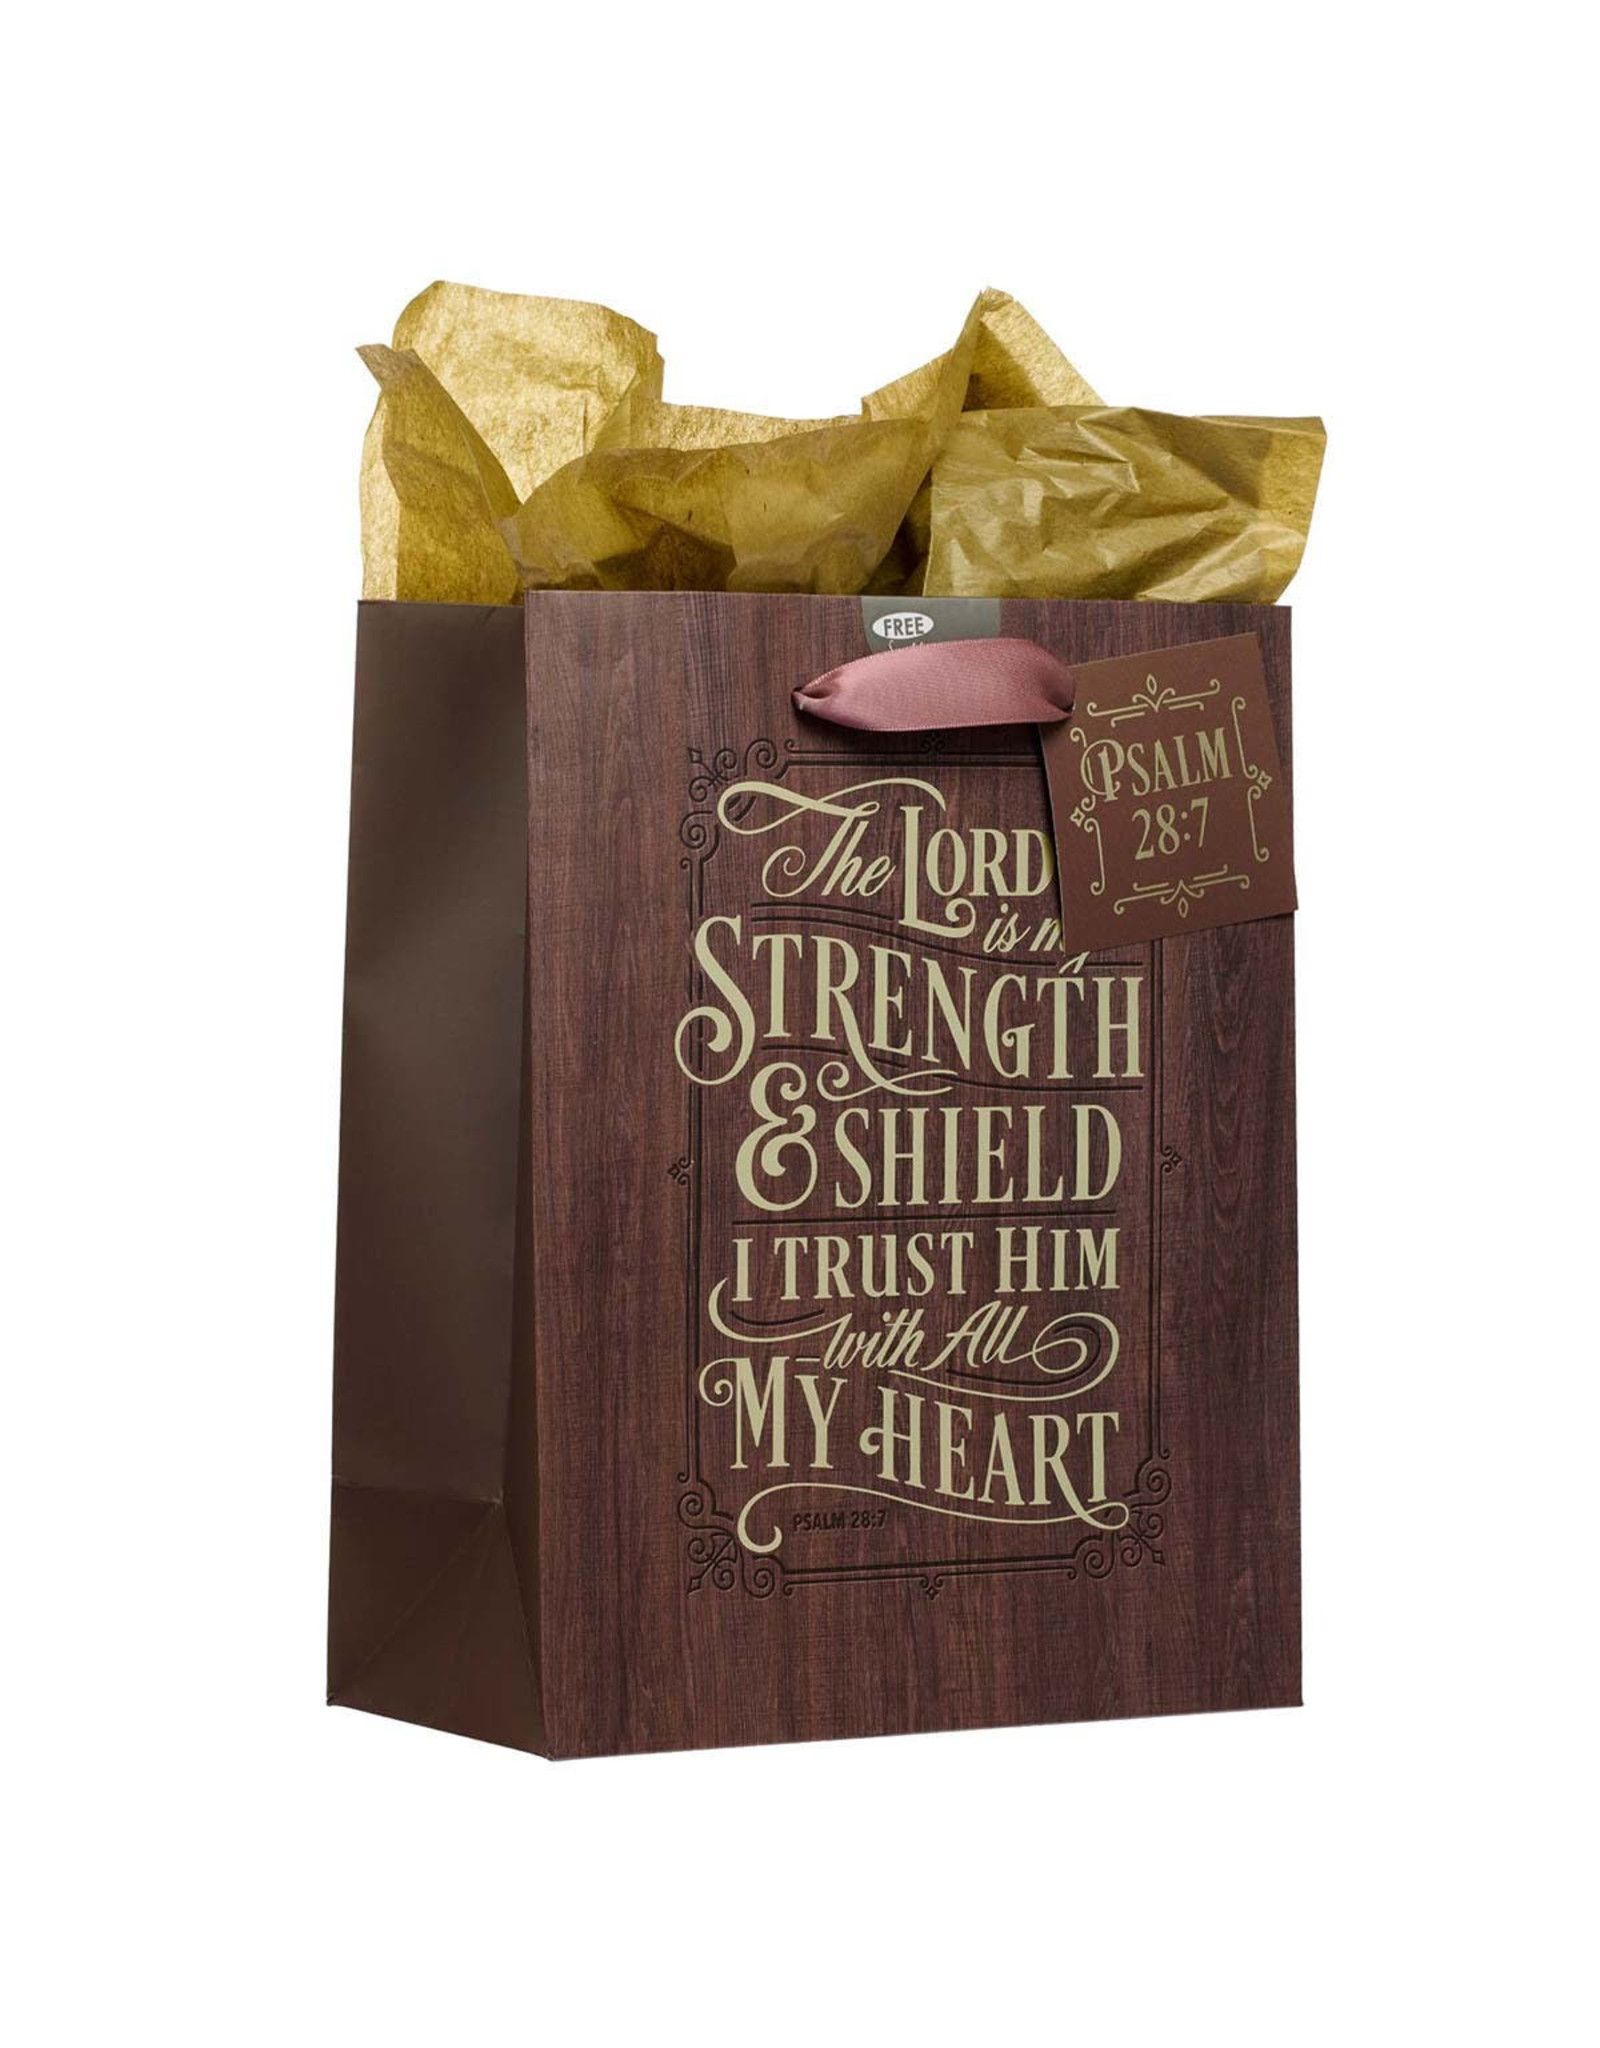 Christian Art Gifts Medium Gift Bag - The Lord is my Strength and Shield (Psalm 28:7)